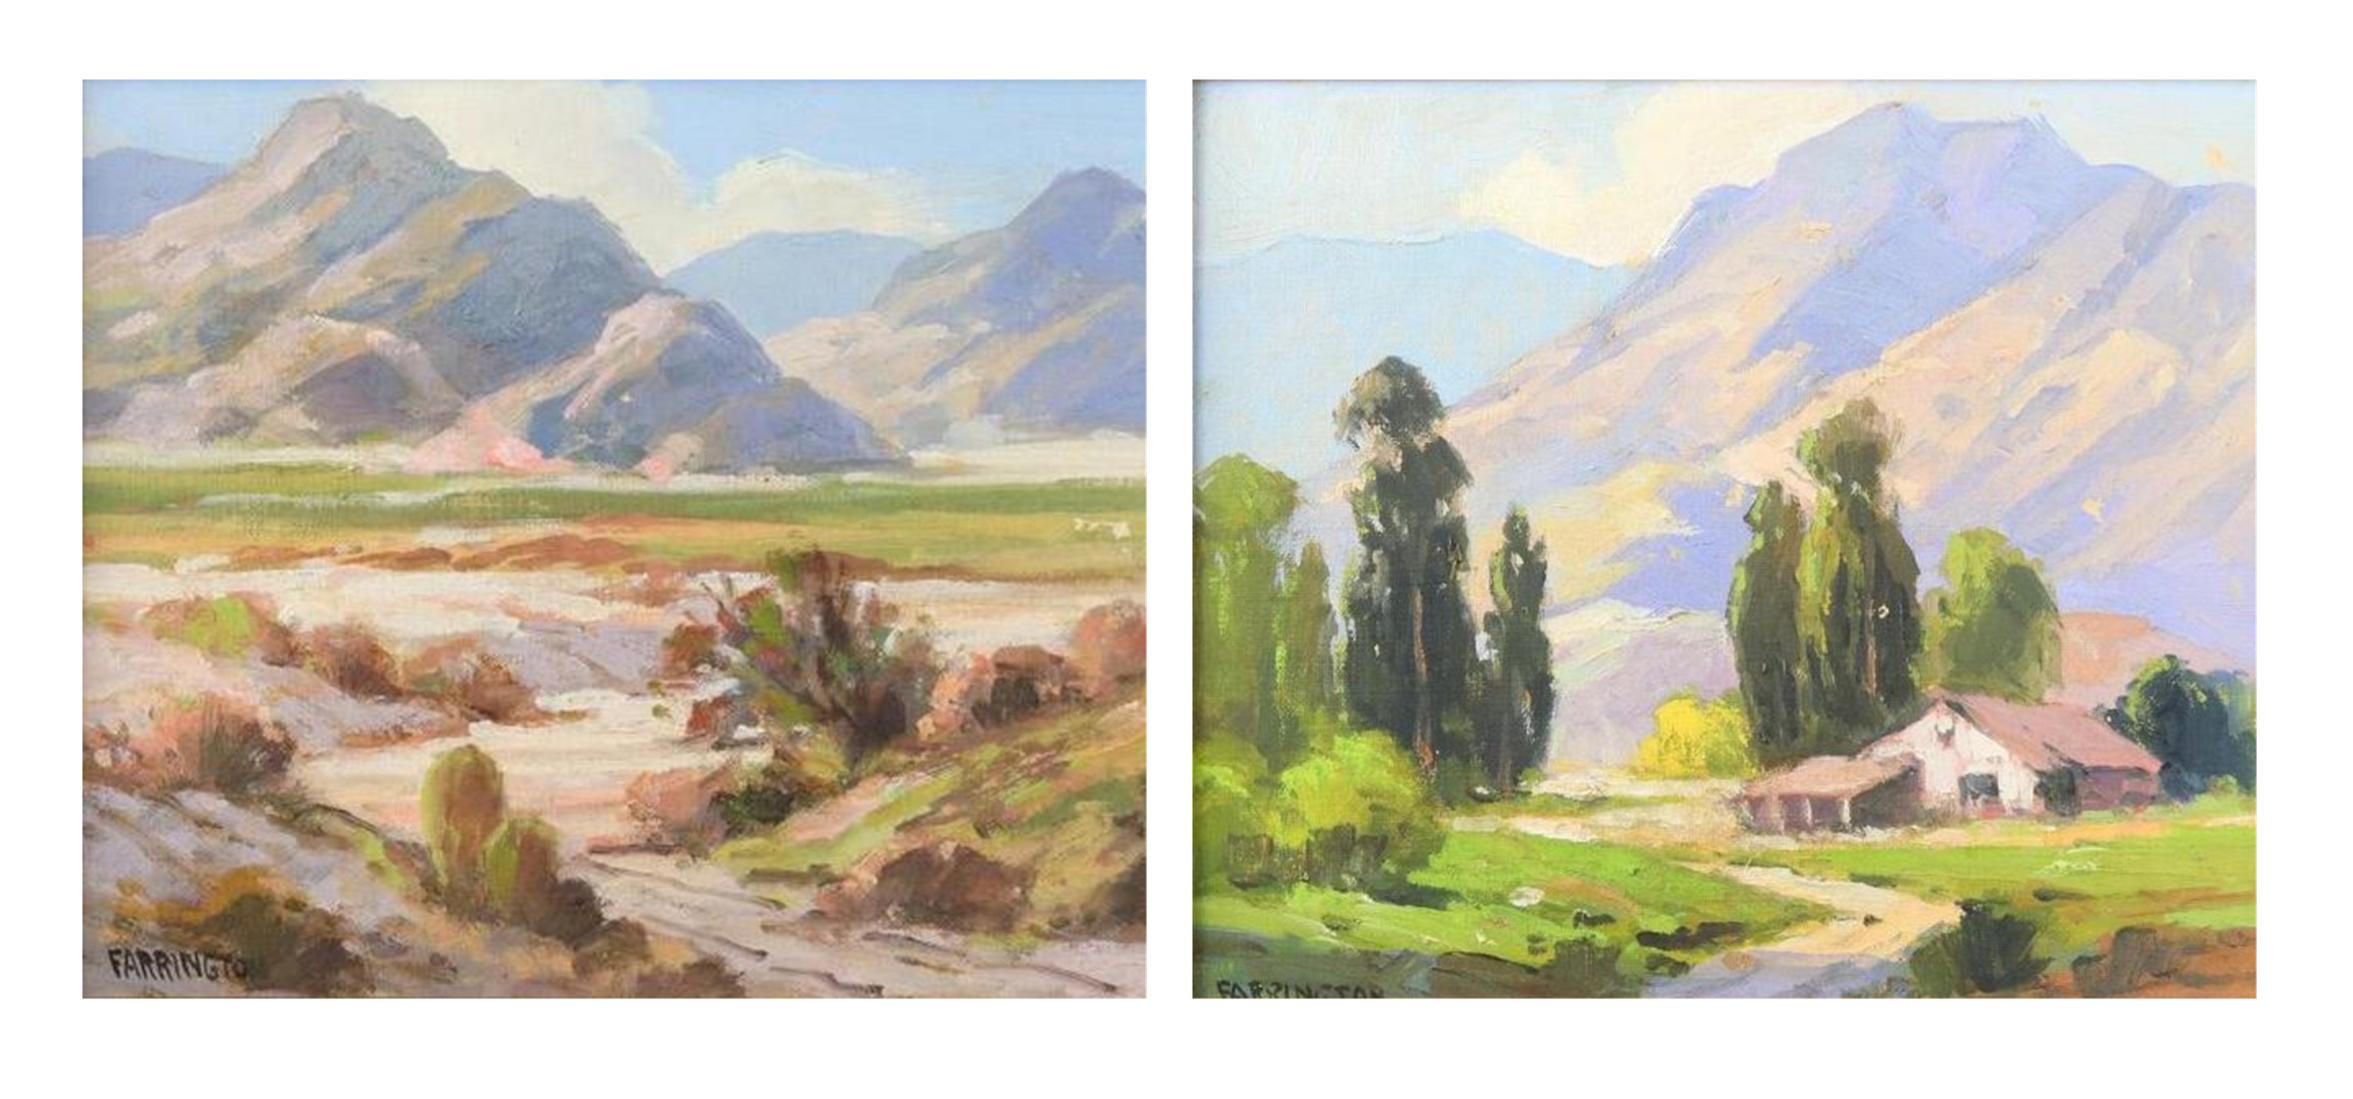 Set of 2 paintings
Walter Farrington Moses (American, 1874-1947)
"Sunland" and "Indian Wells" 
 Oil on board
Each signed lower left, each titled verso
Each overall with frame: 12.5"h x 14.5"w
After studying at the School of the Art Institute of